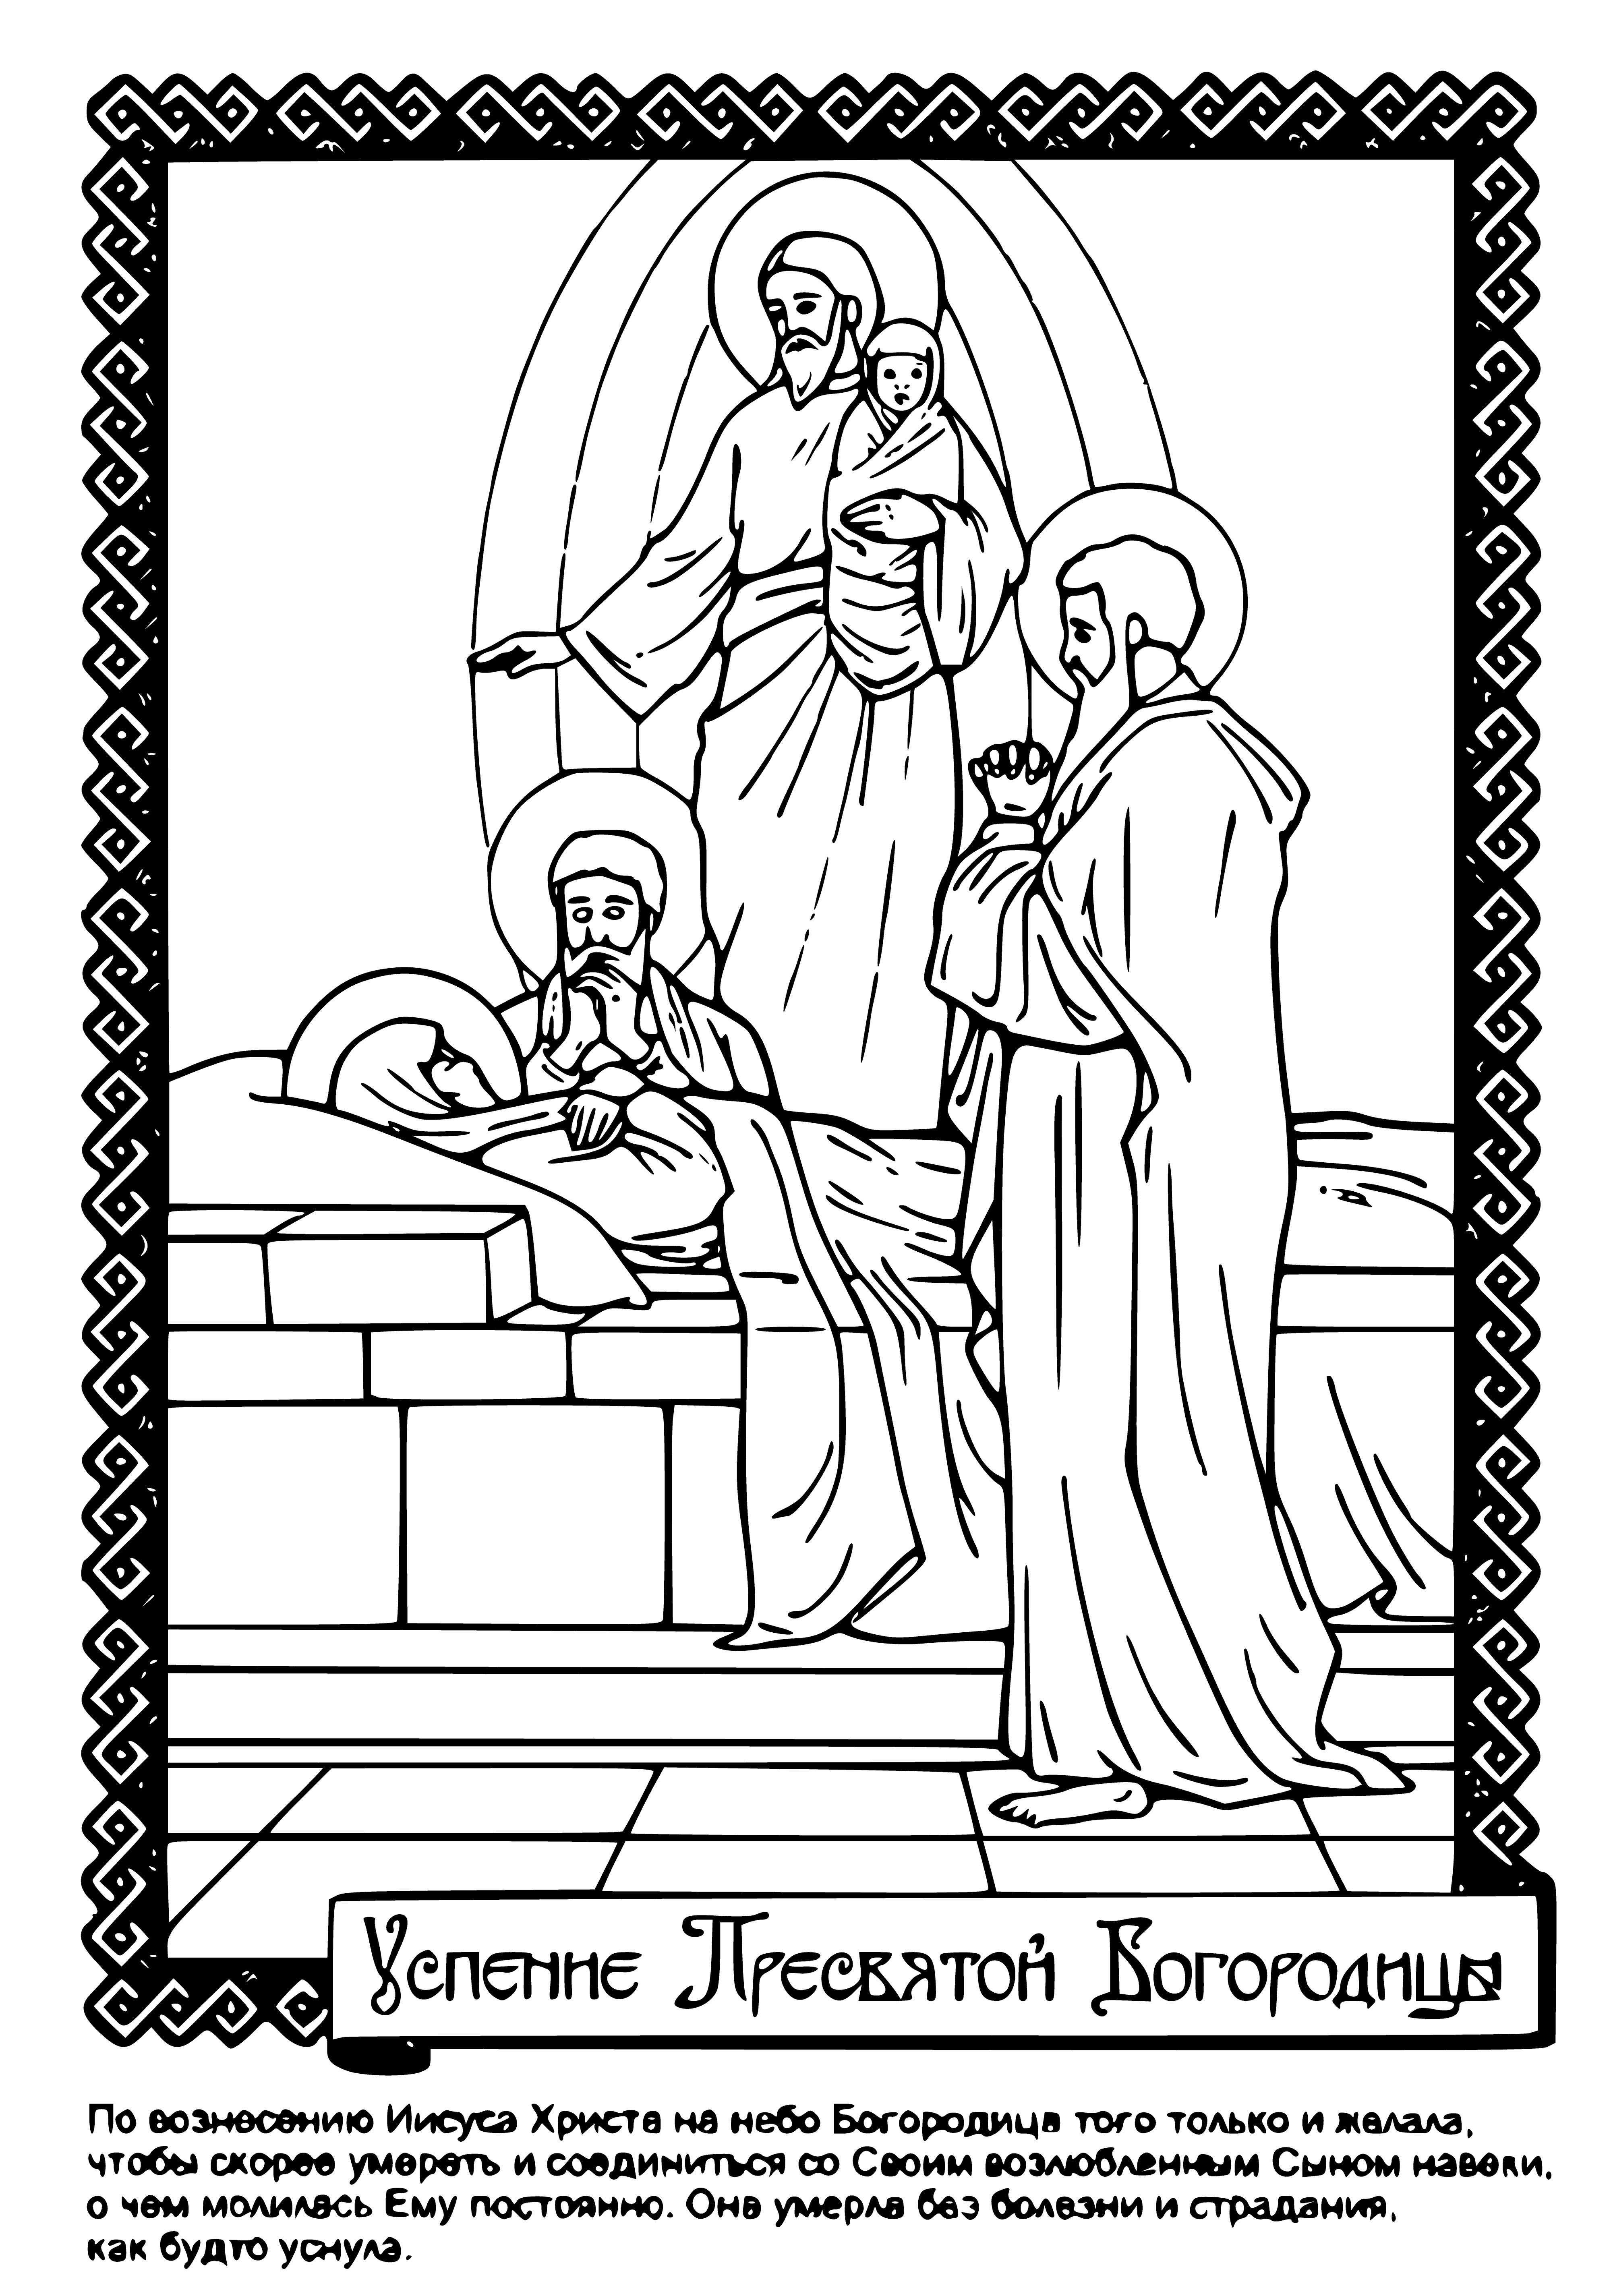 coloring page: The Orthodox Church remembers the Virgin Mary's death with the Dormition feast on August 15, one of 12 Great Feasts.